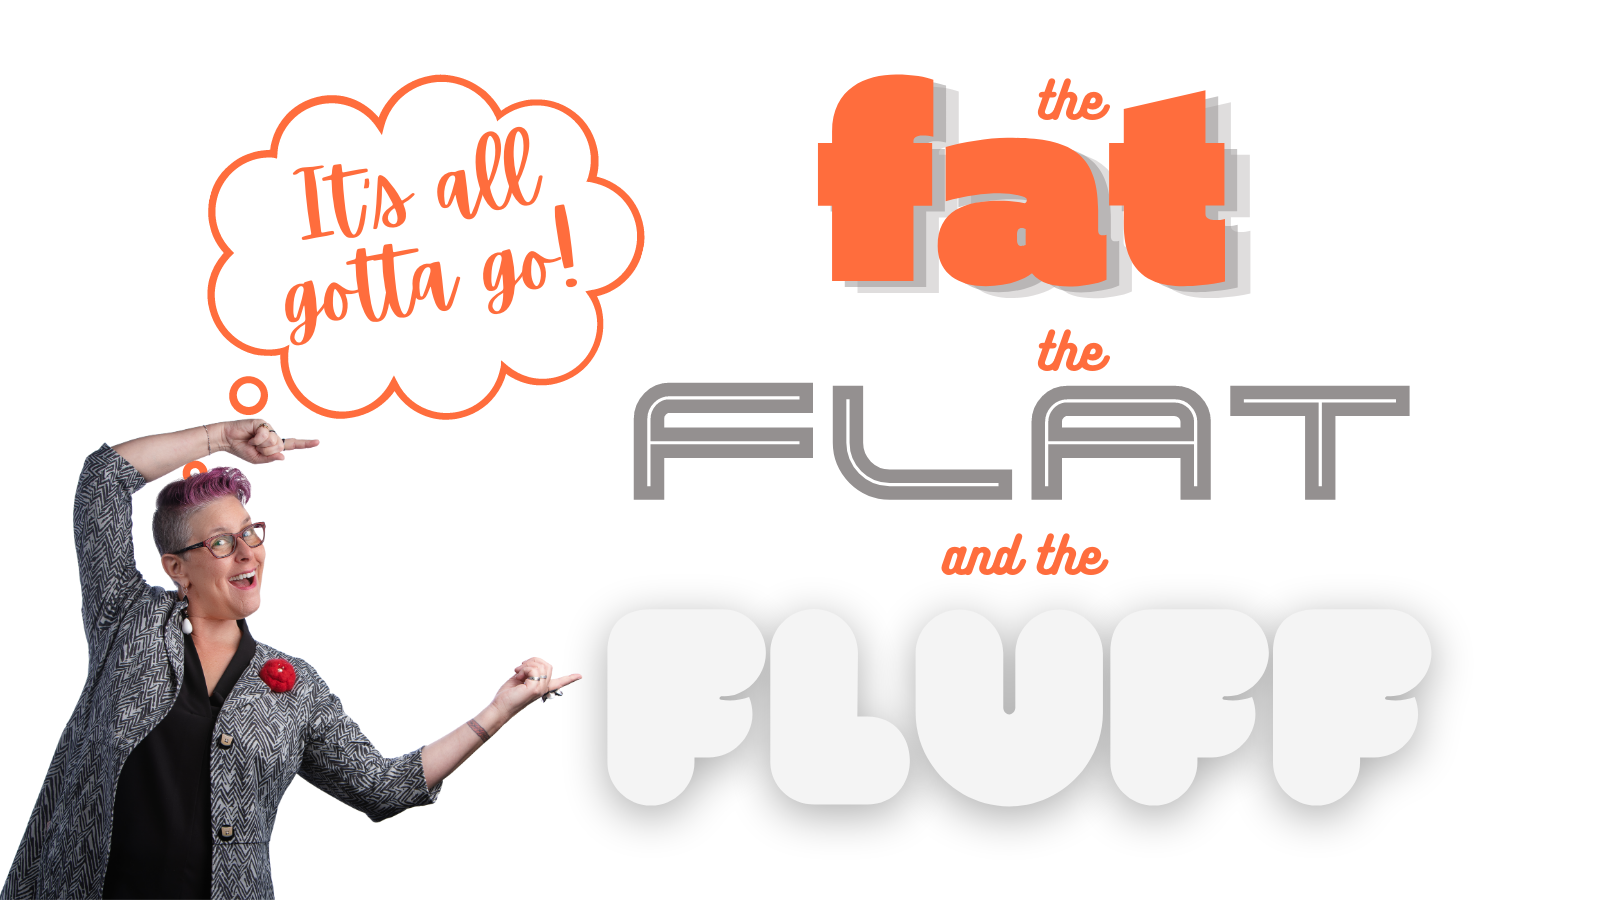 The fat, the flat, and the fluff